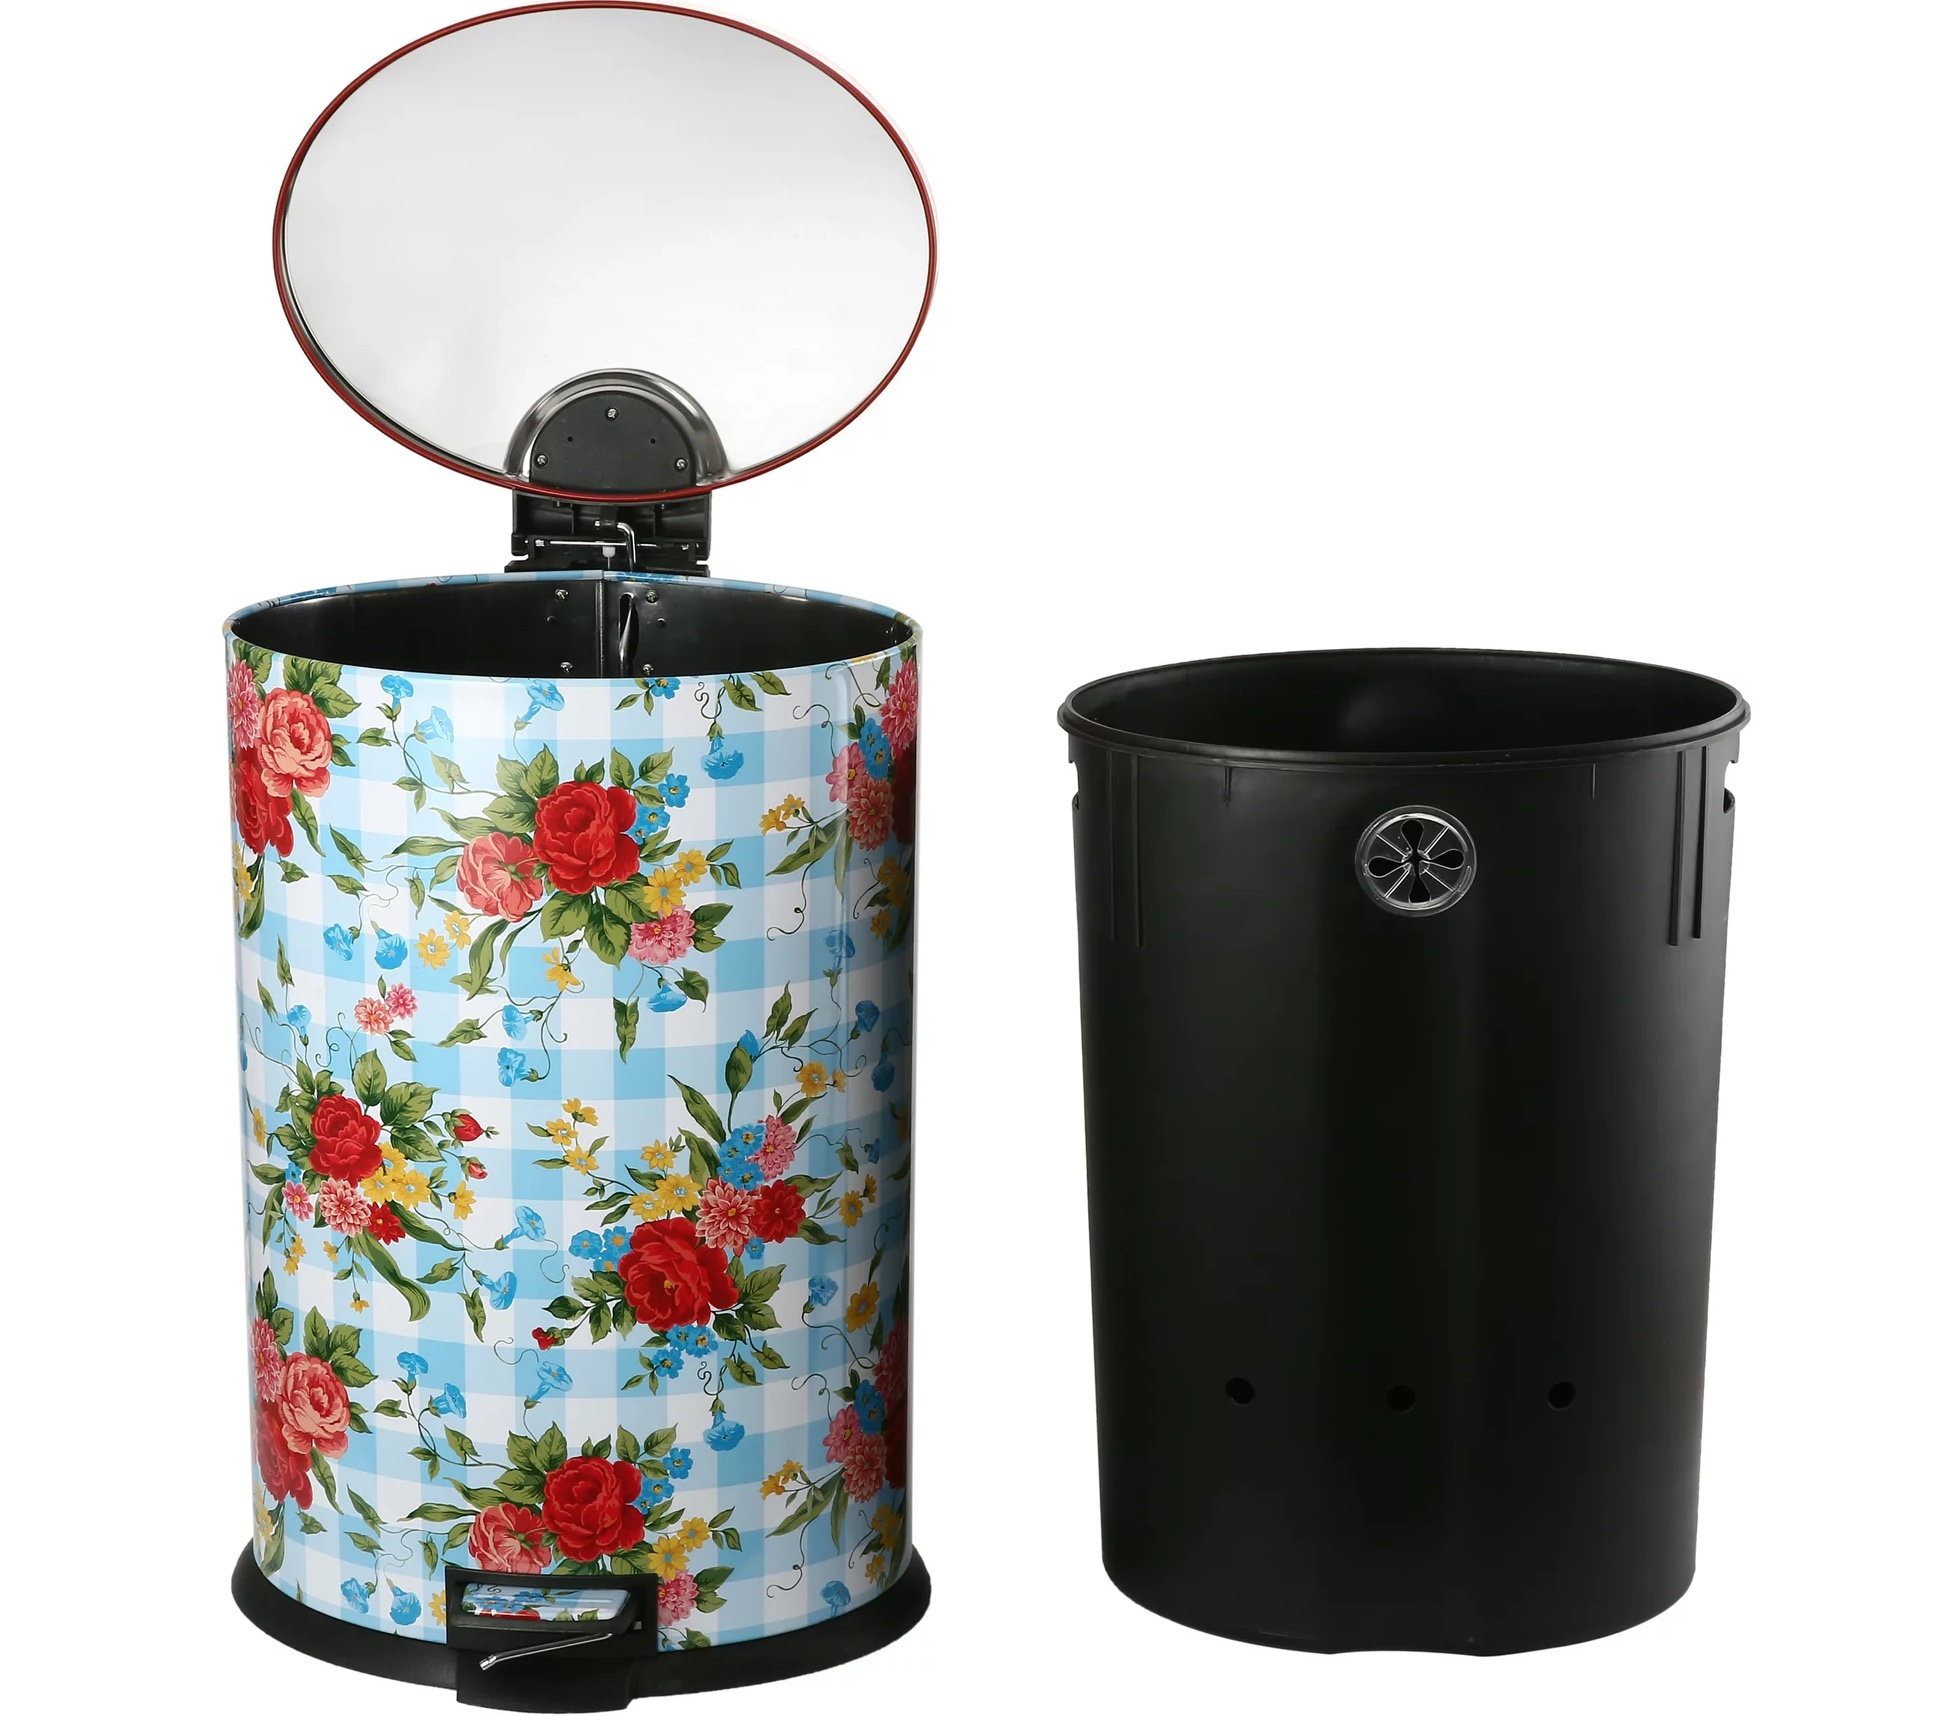 two side by side stock images of Pioneer Woman Trash Can